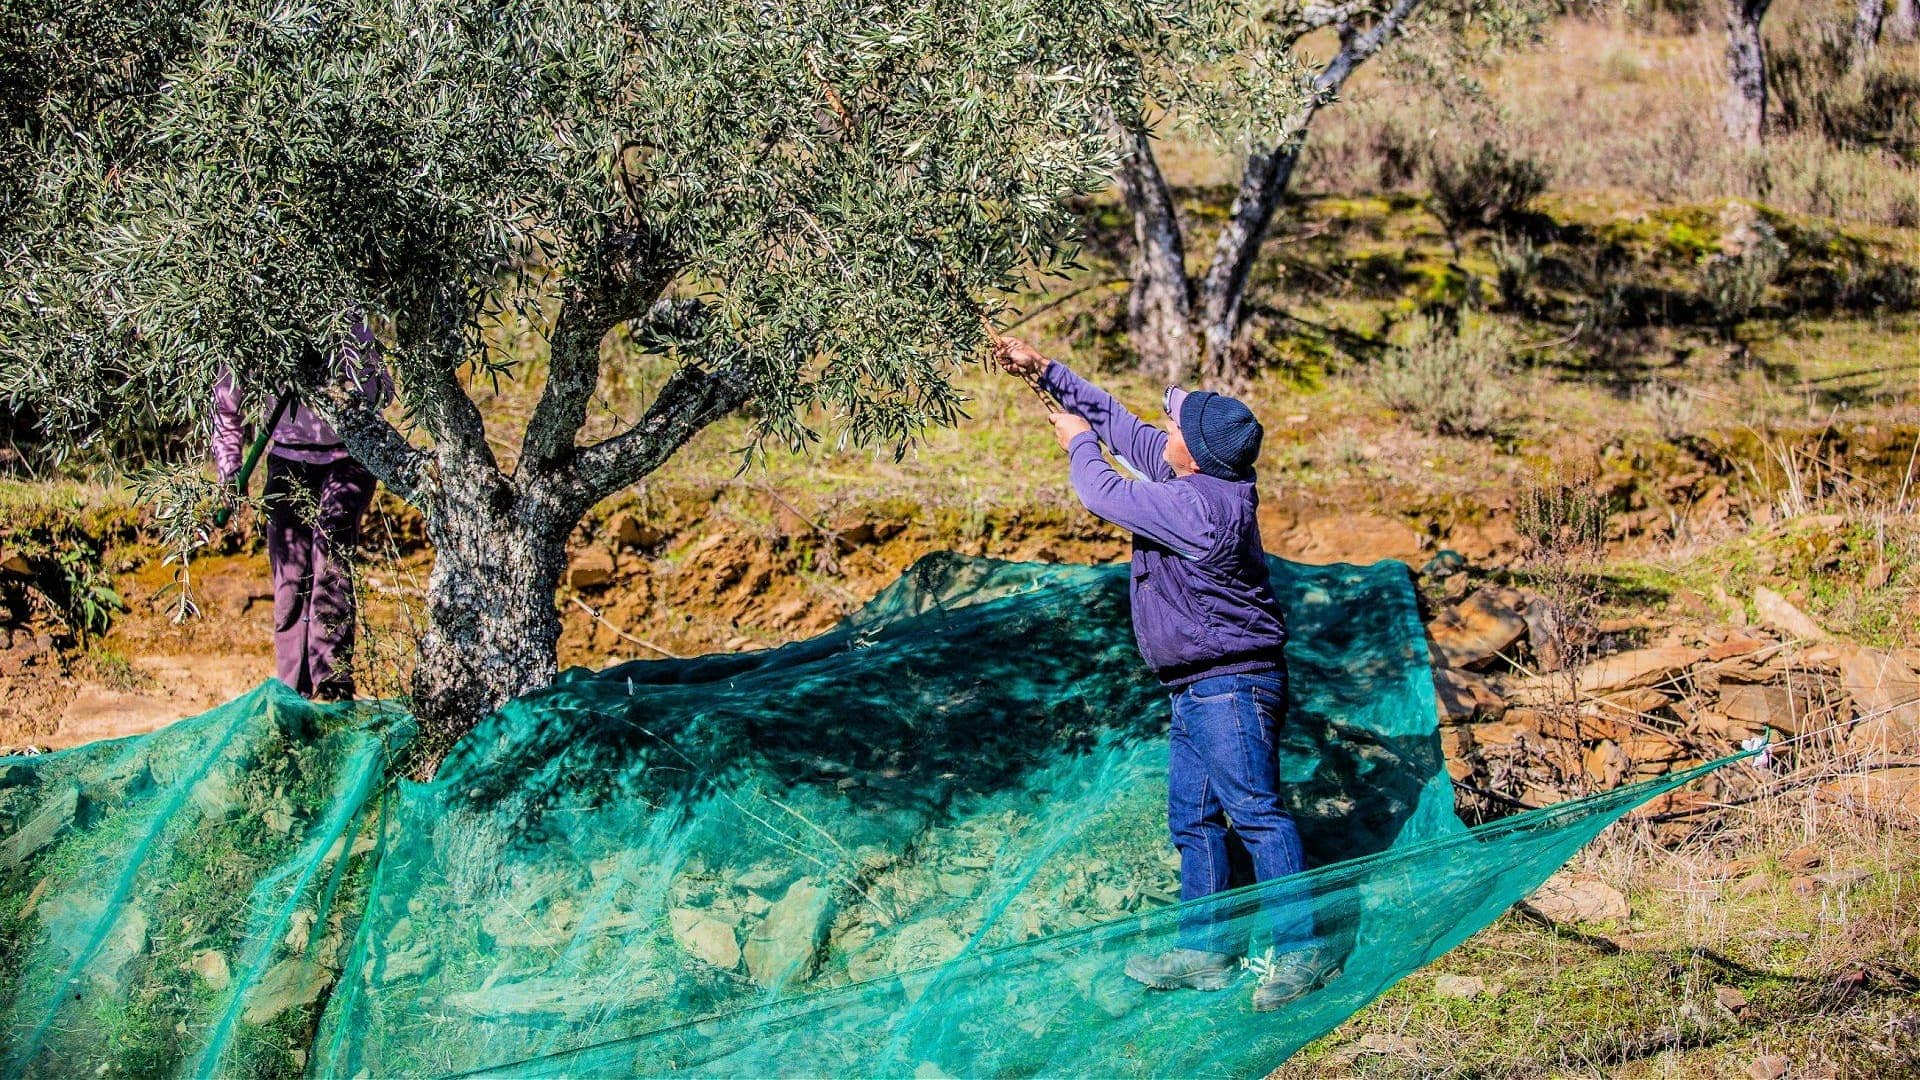 europe-production-business-olive-oil-production-in-portugal-set-to-slump-after-record-year-olive-oil-times